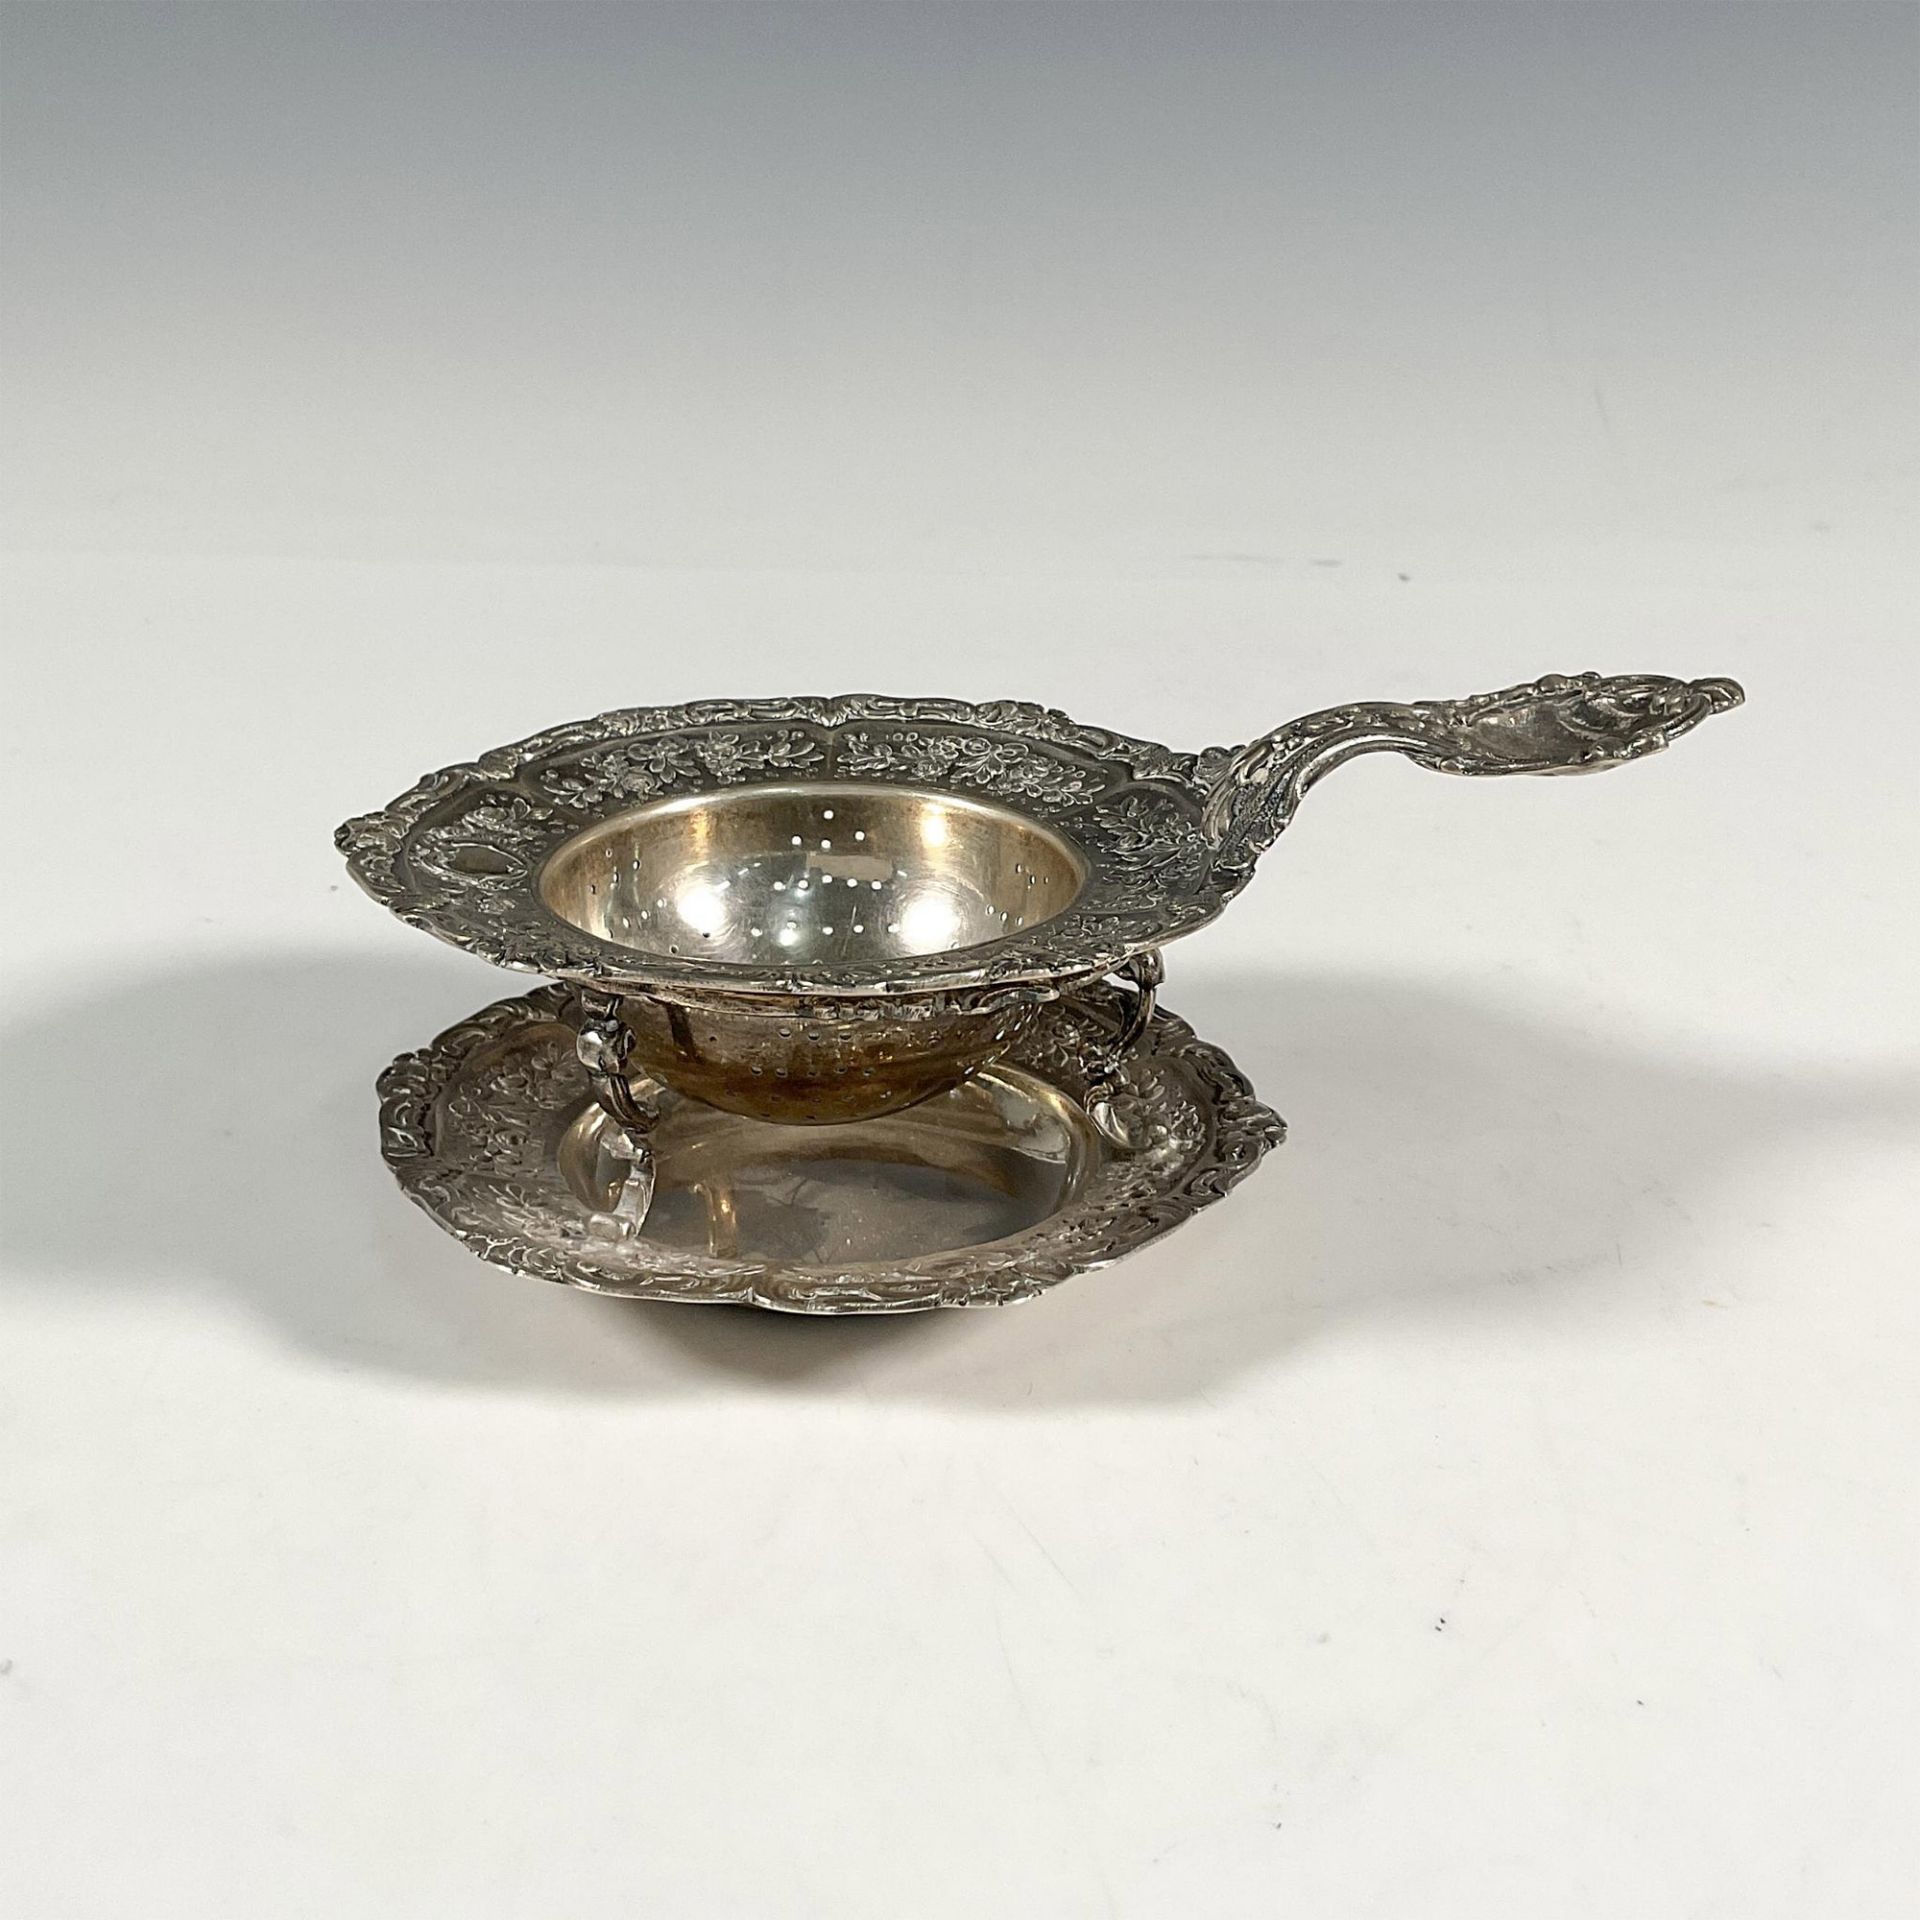 Antique German Silver Tea Strainer with Drip Tray - Image 2 of 3